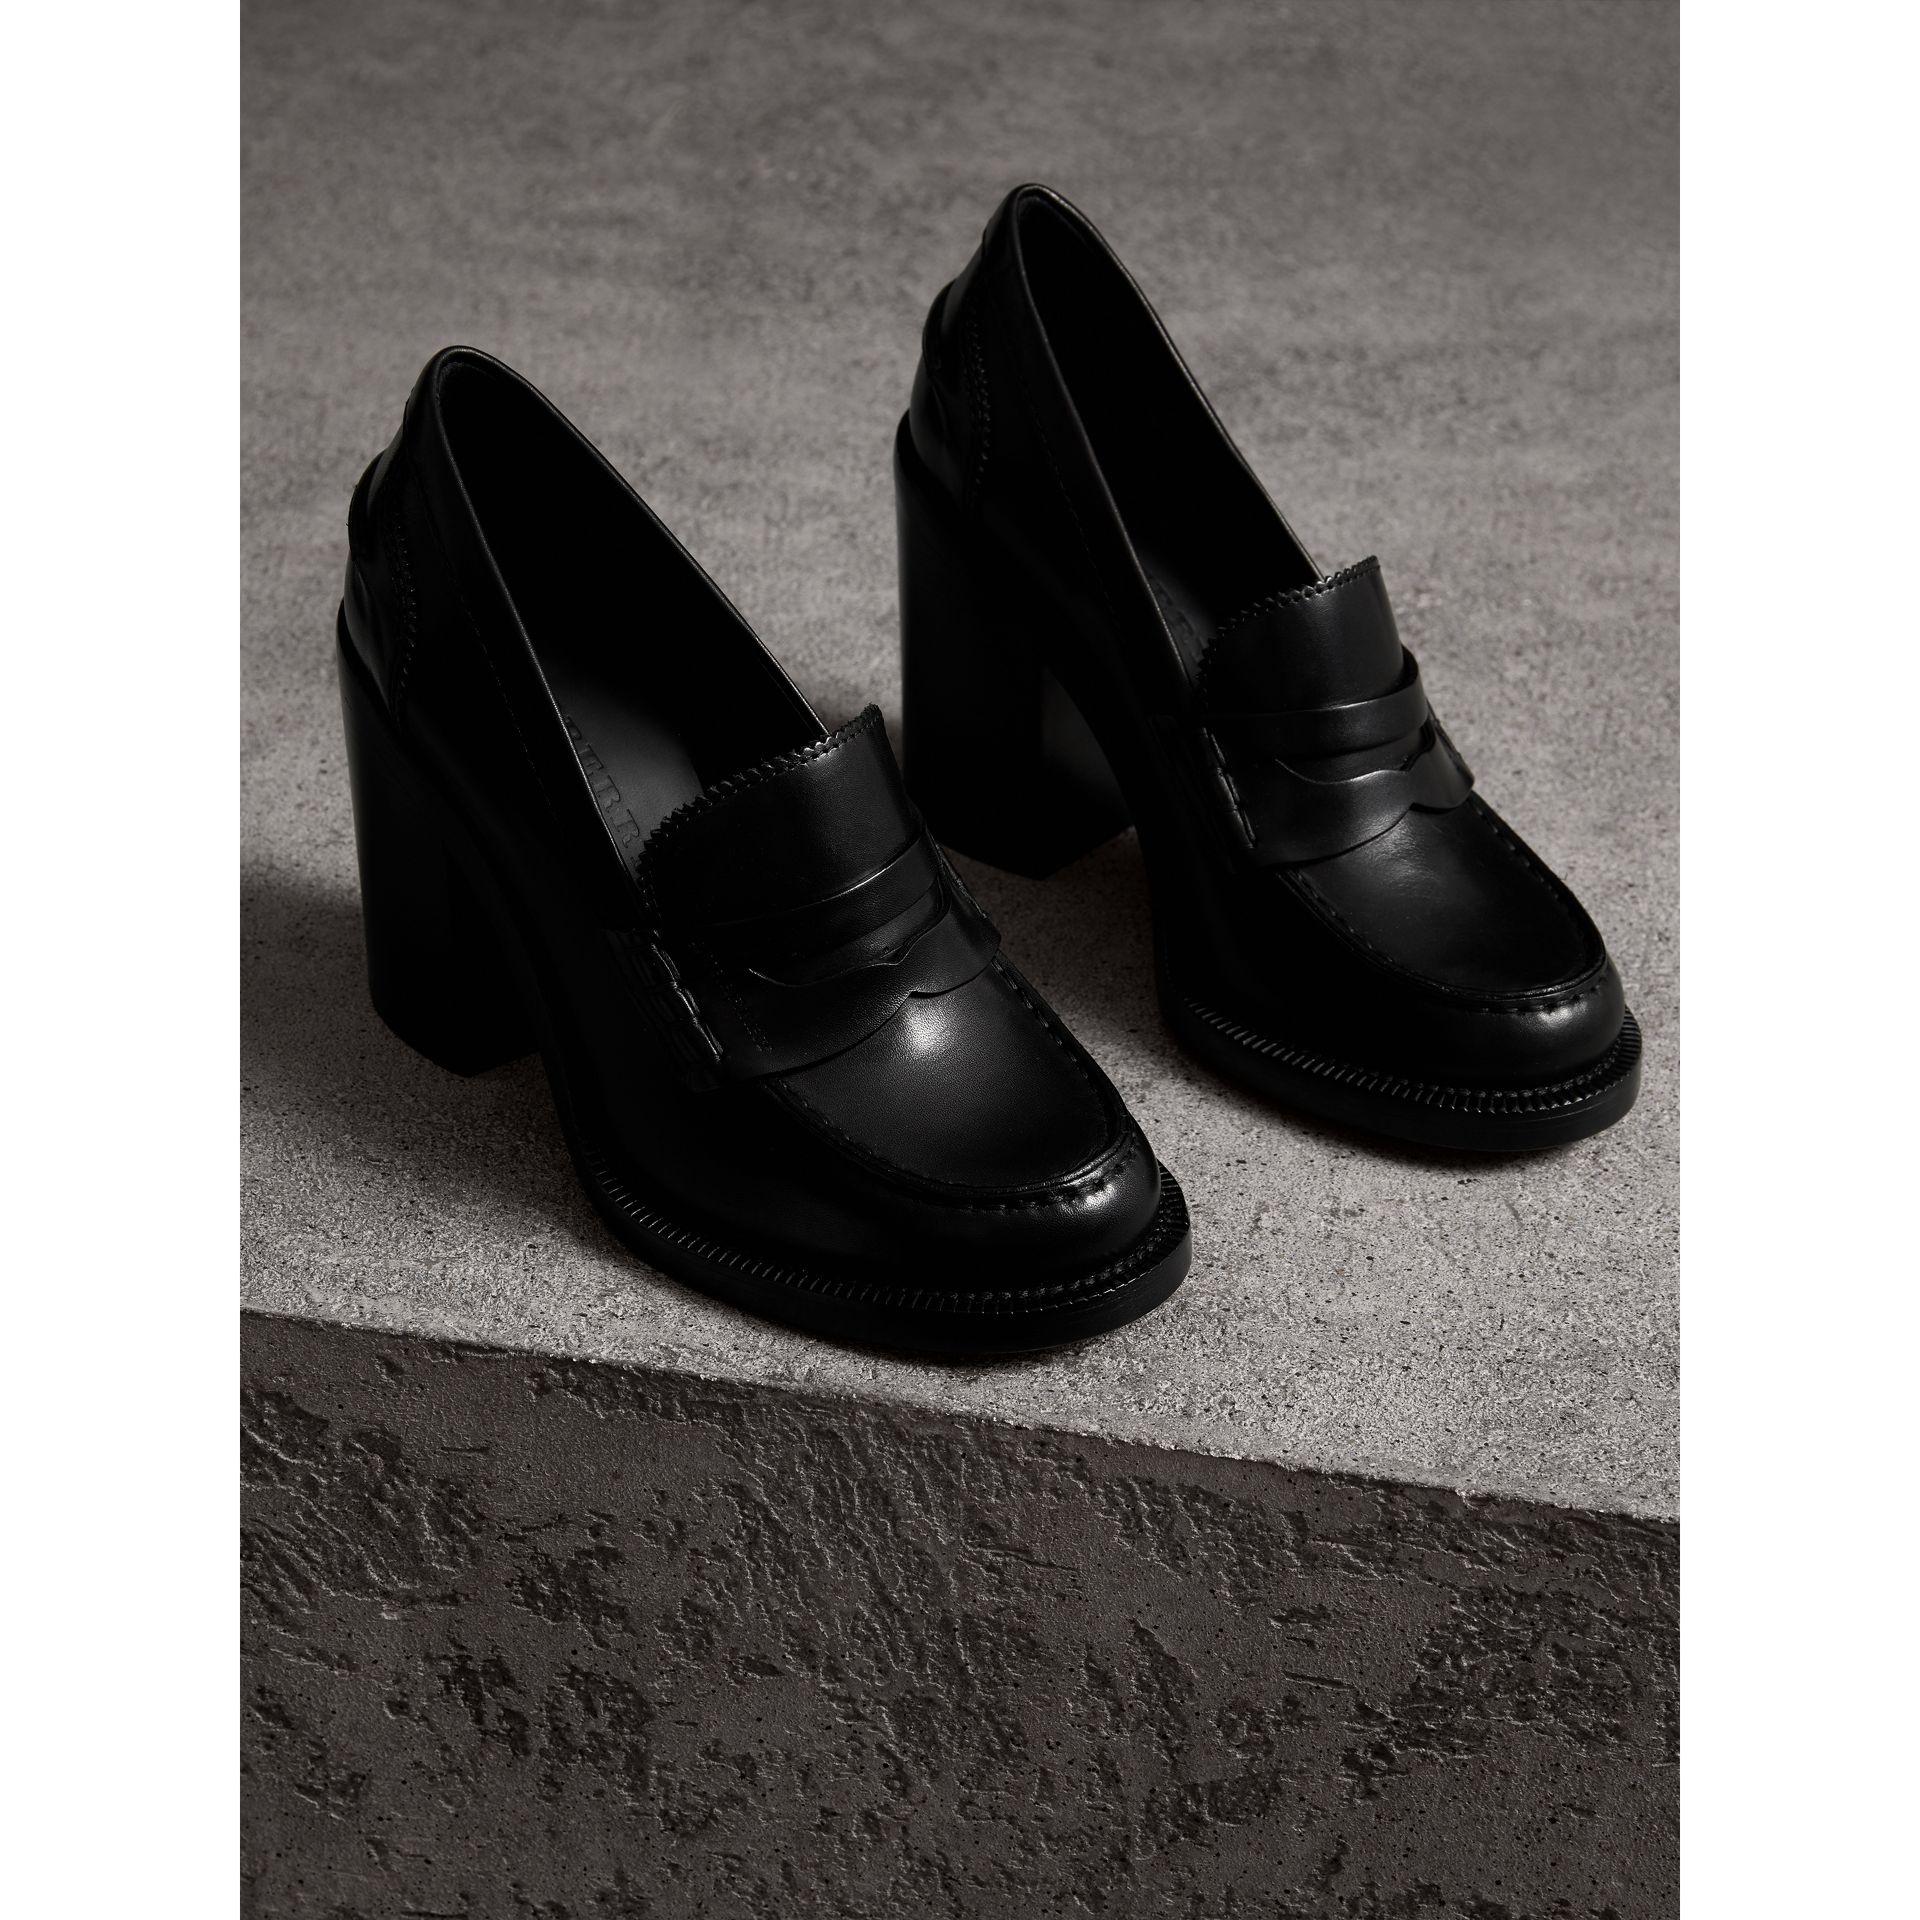 Buy > womens penny loafers with heels > in stock